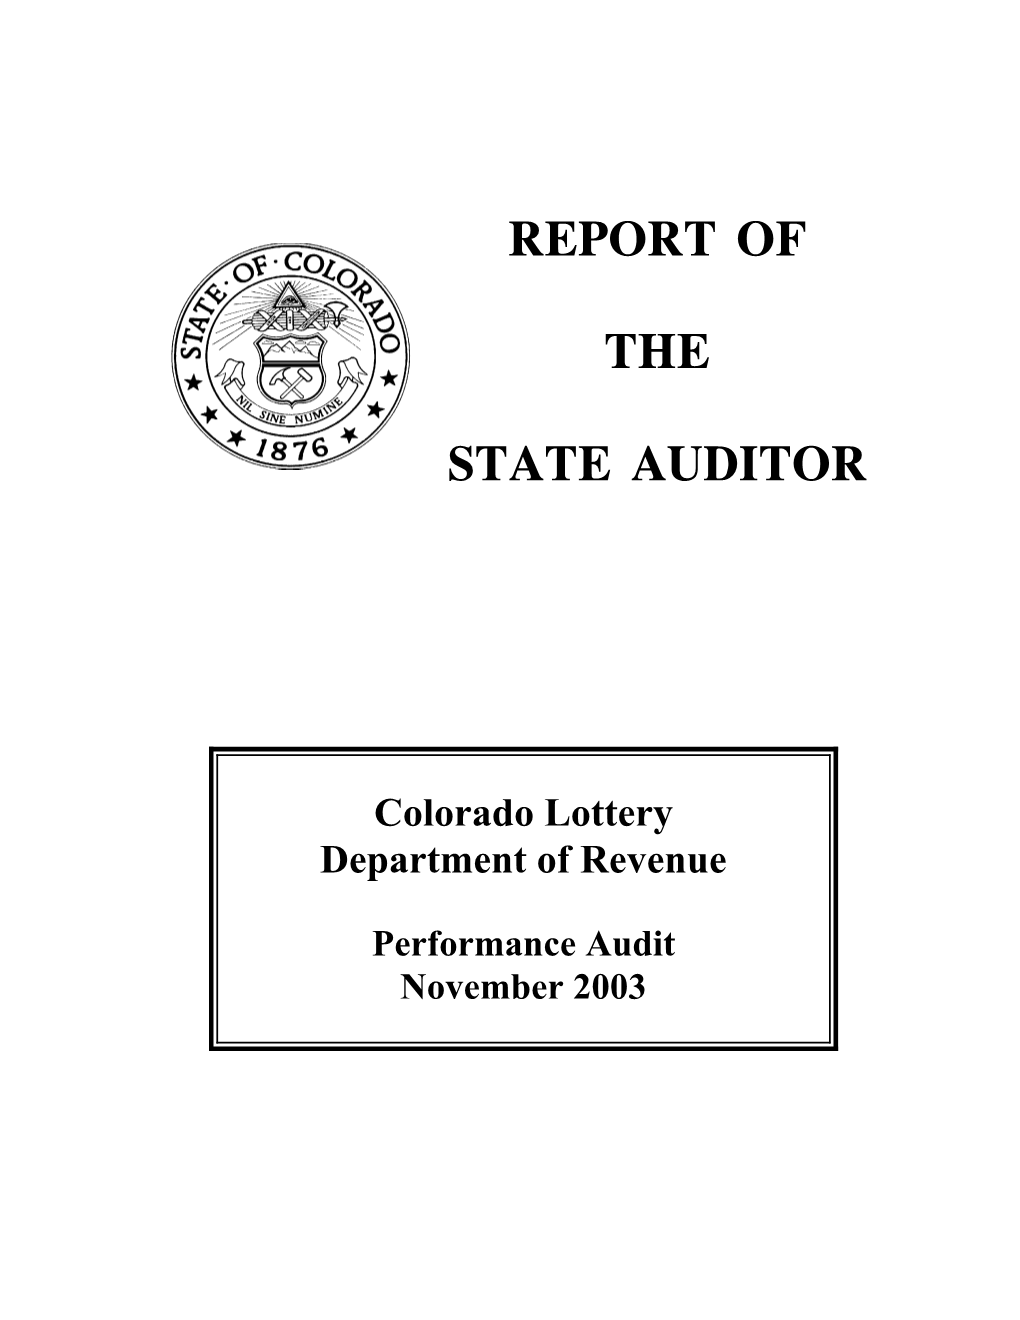 1998 Audit Report Cover